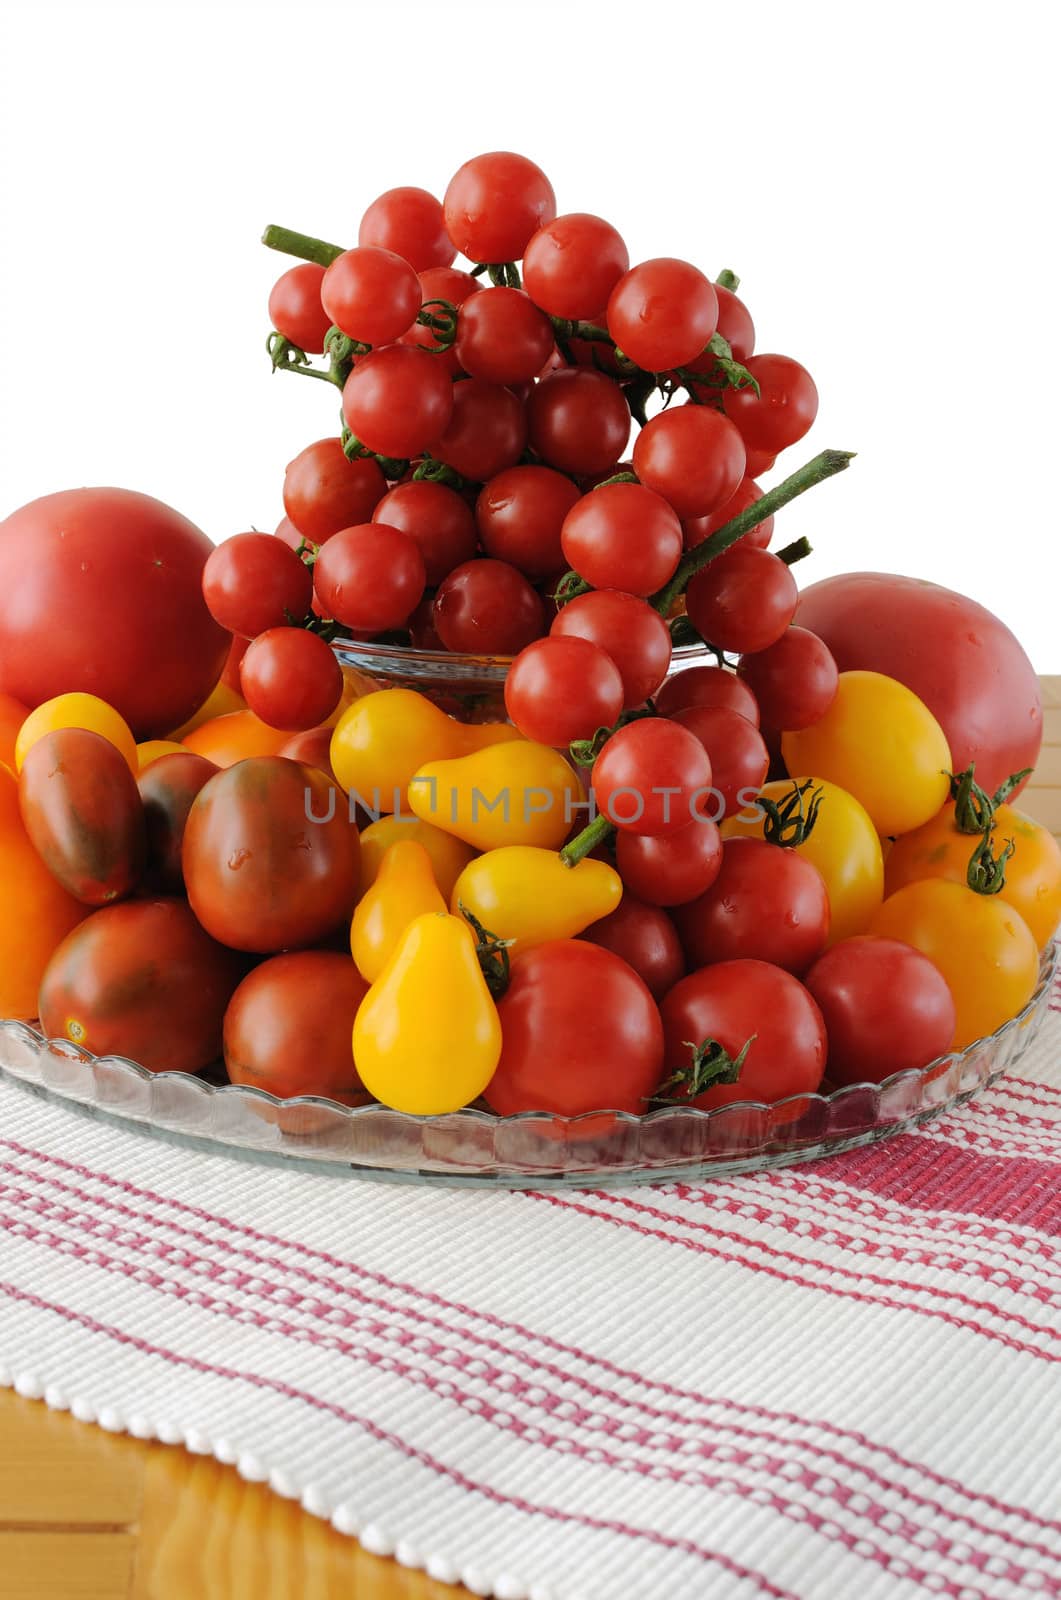 Different varieties of tomatoes in a glass vase on a napkin